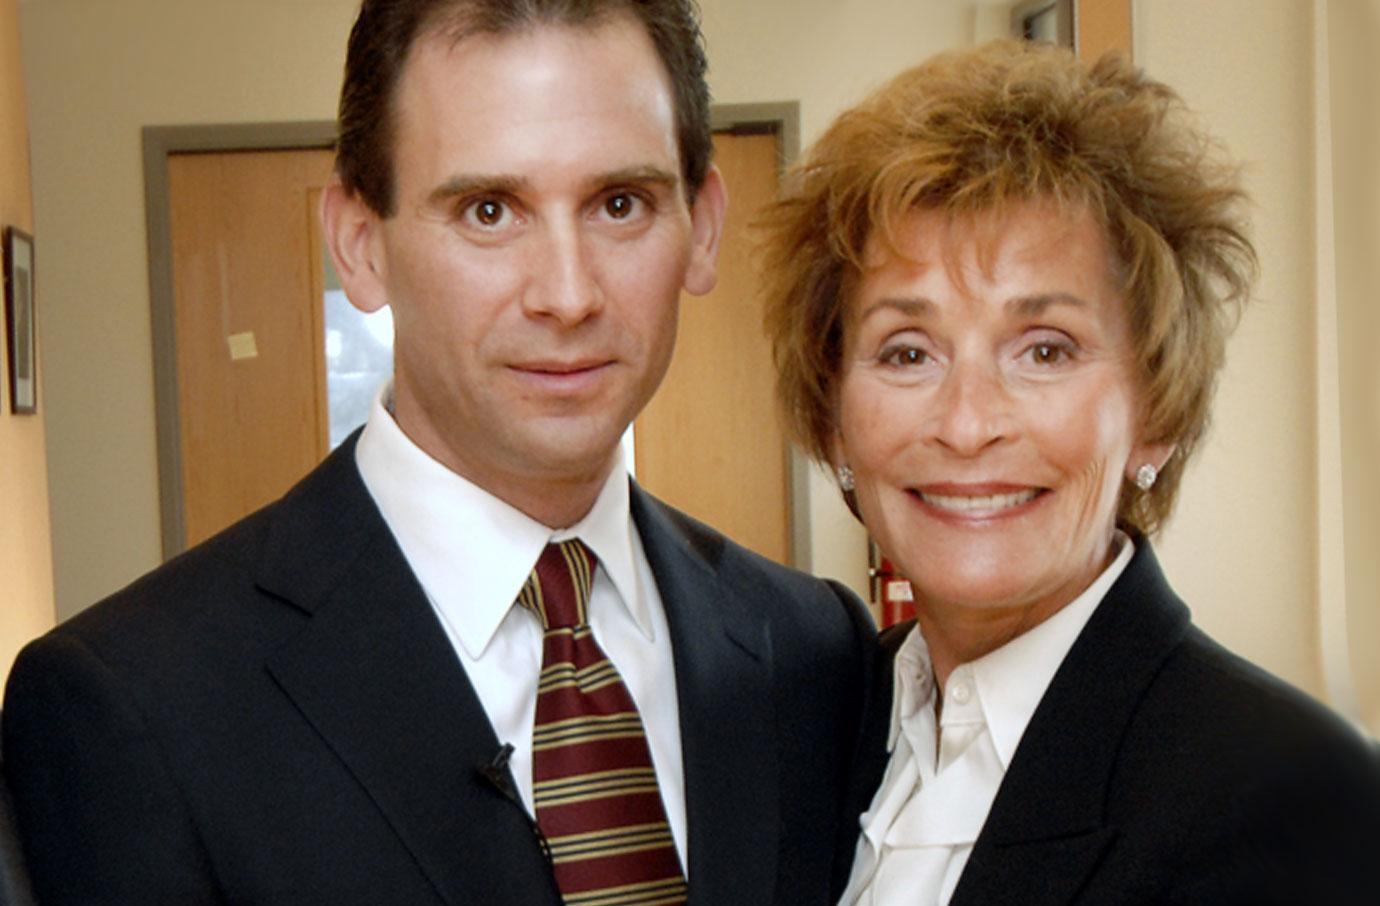 Judge Judy's Son Adam Levy Wins Vindication After Public Apology